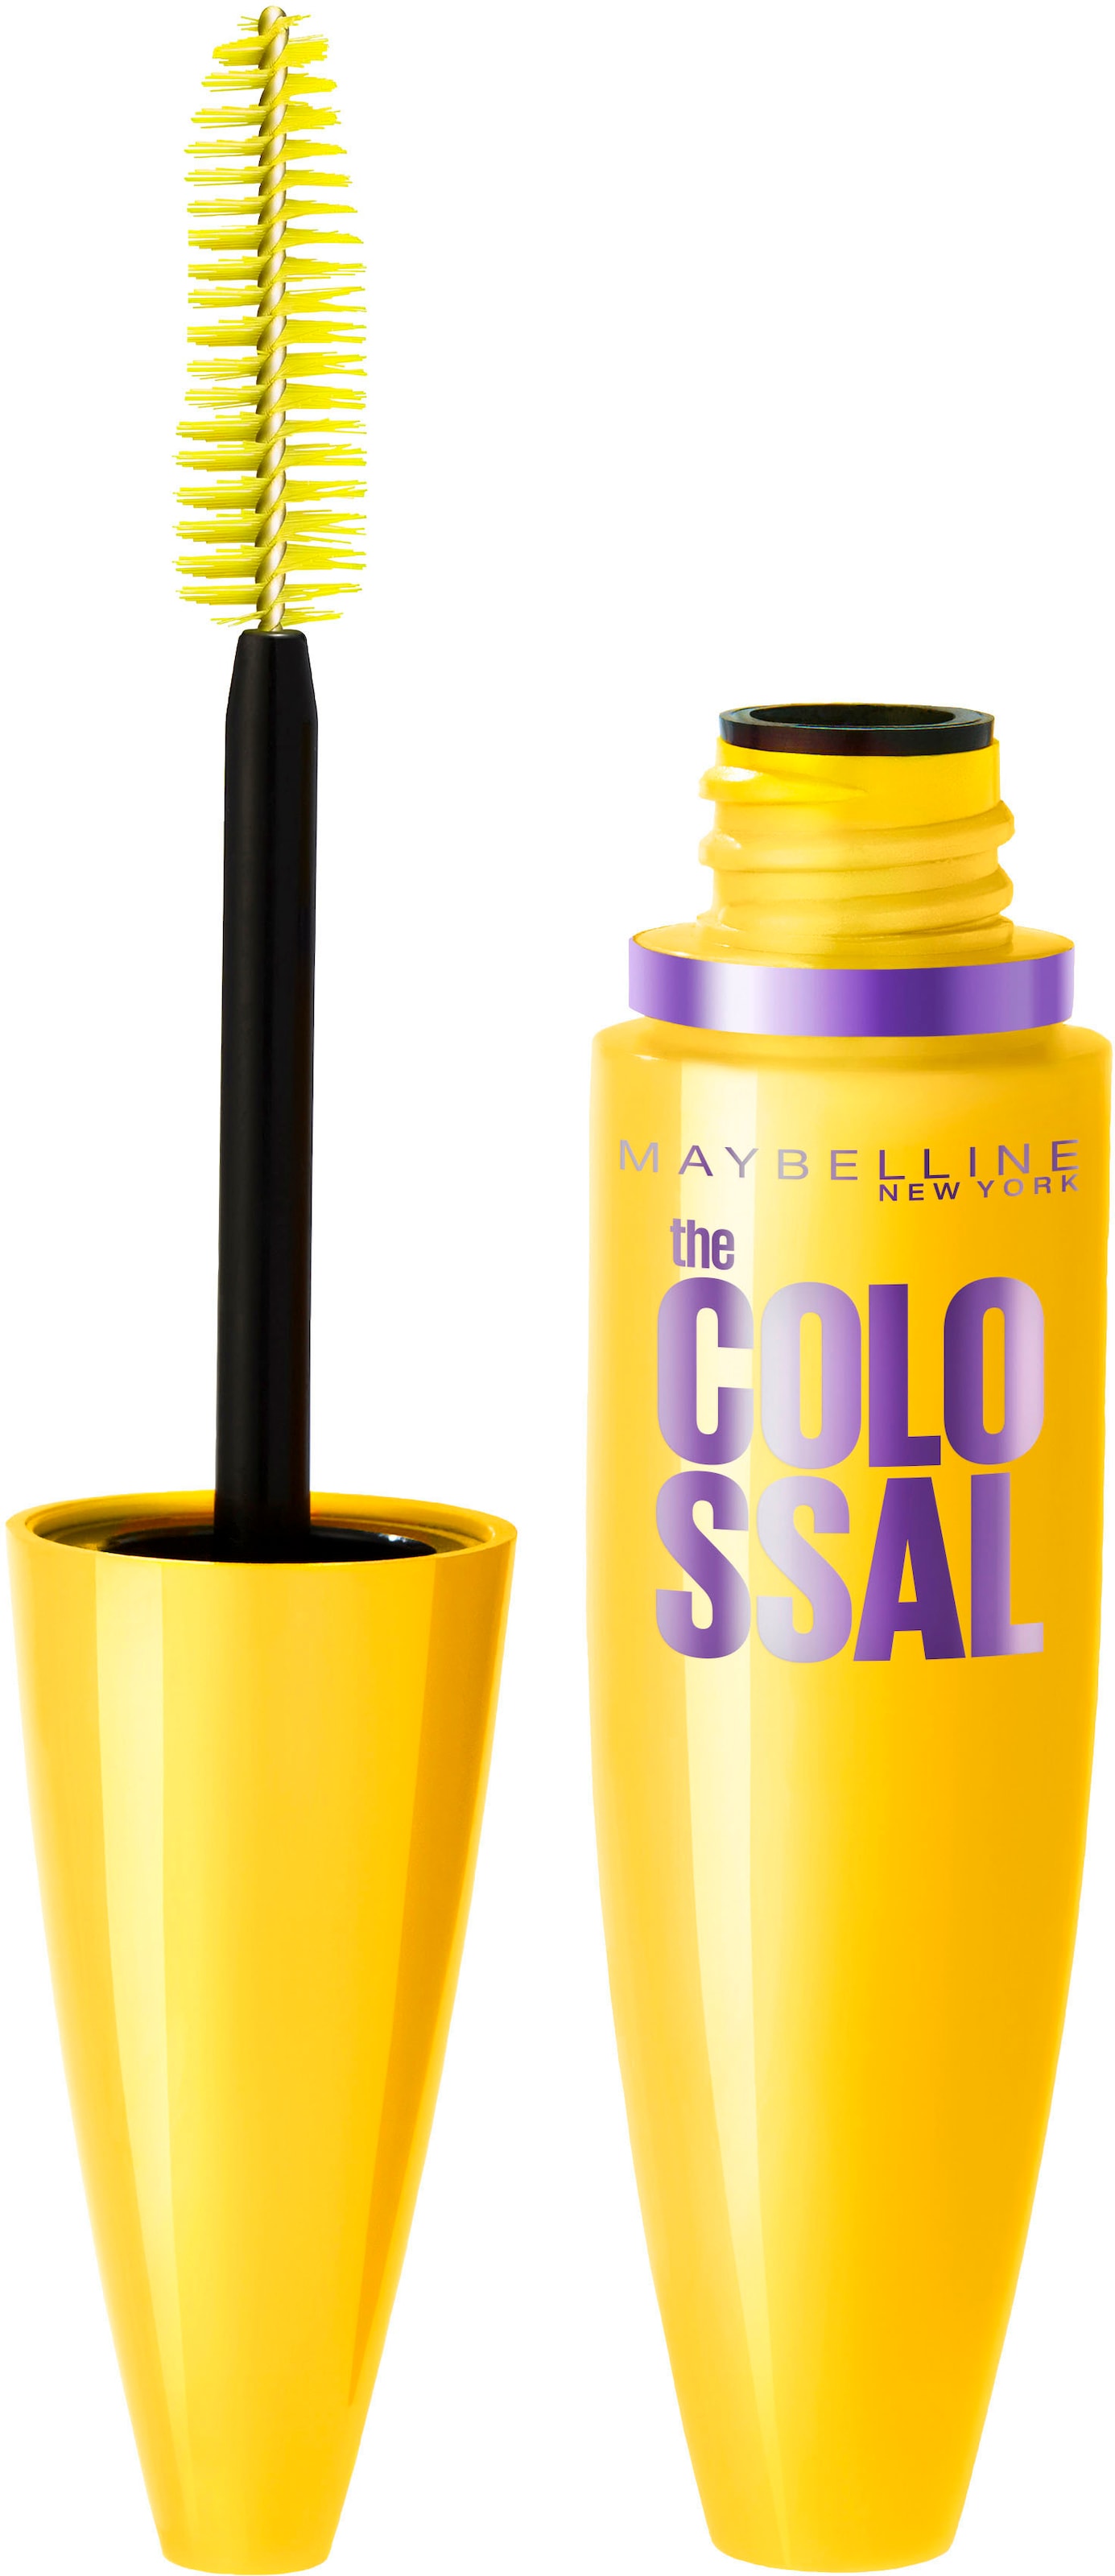 MAYBELLINE NEW YORK Mascara »Volum\' The Express bei Colossal« ♕